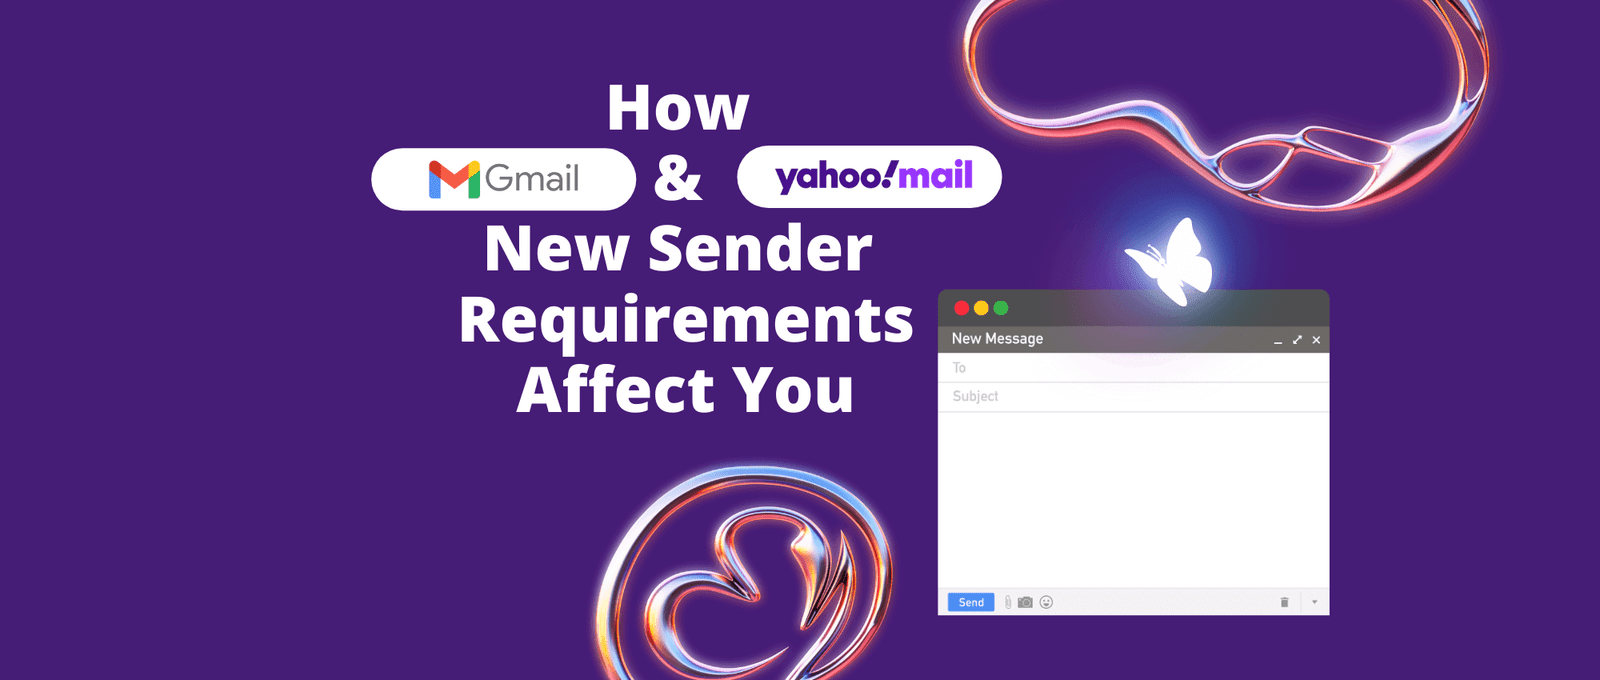 how google and yahoo sender requirements affect you | Manalei Media